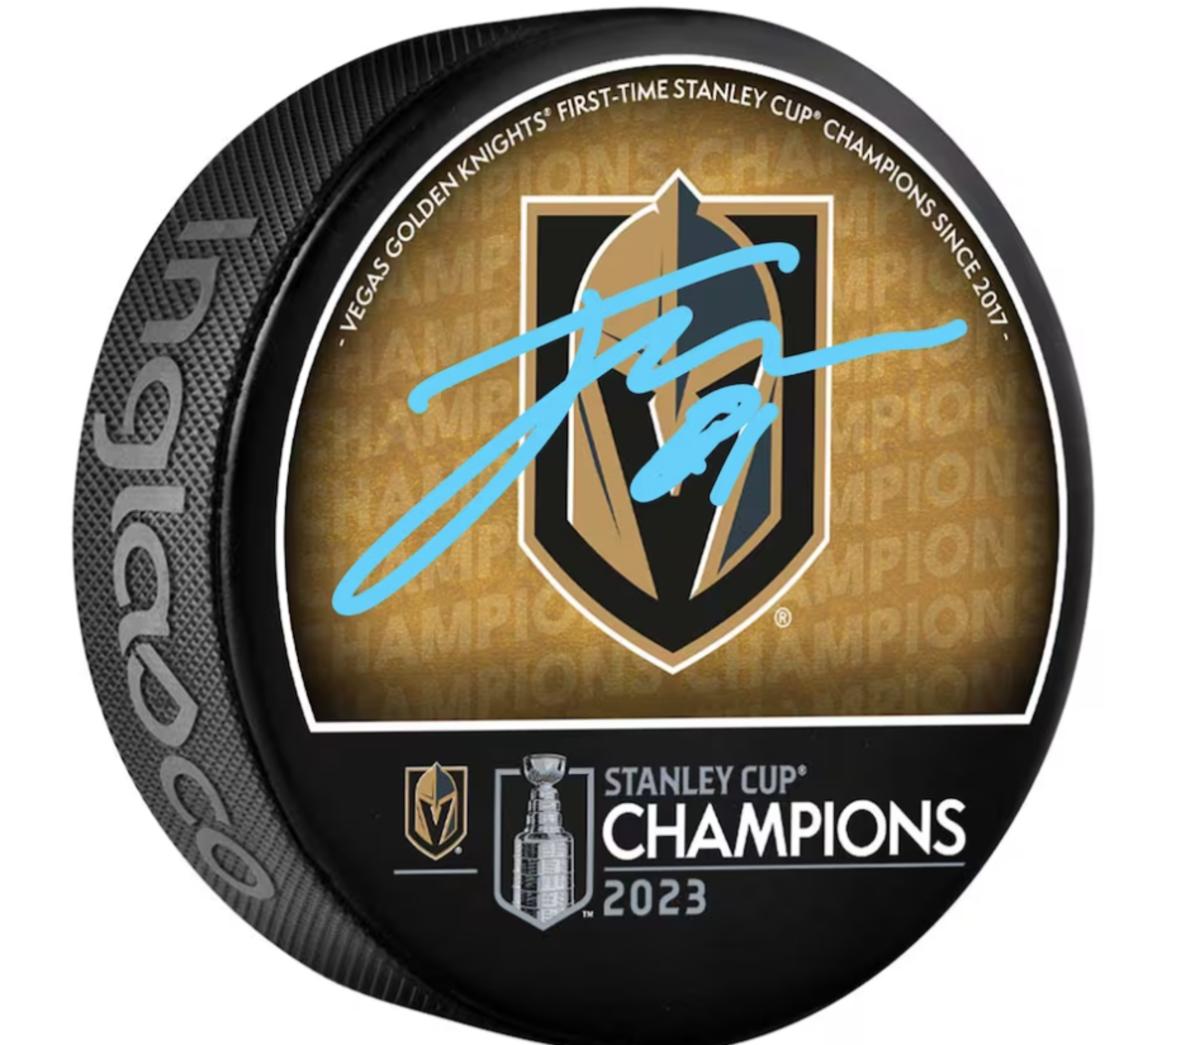 VGK fans rush to stores for new championship merch